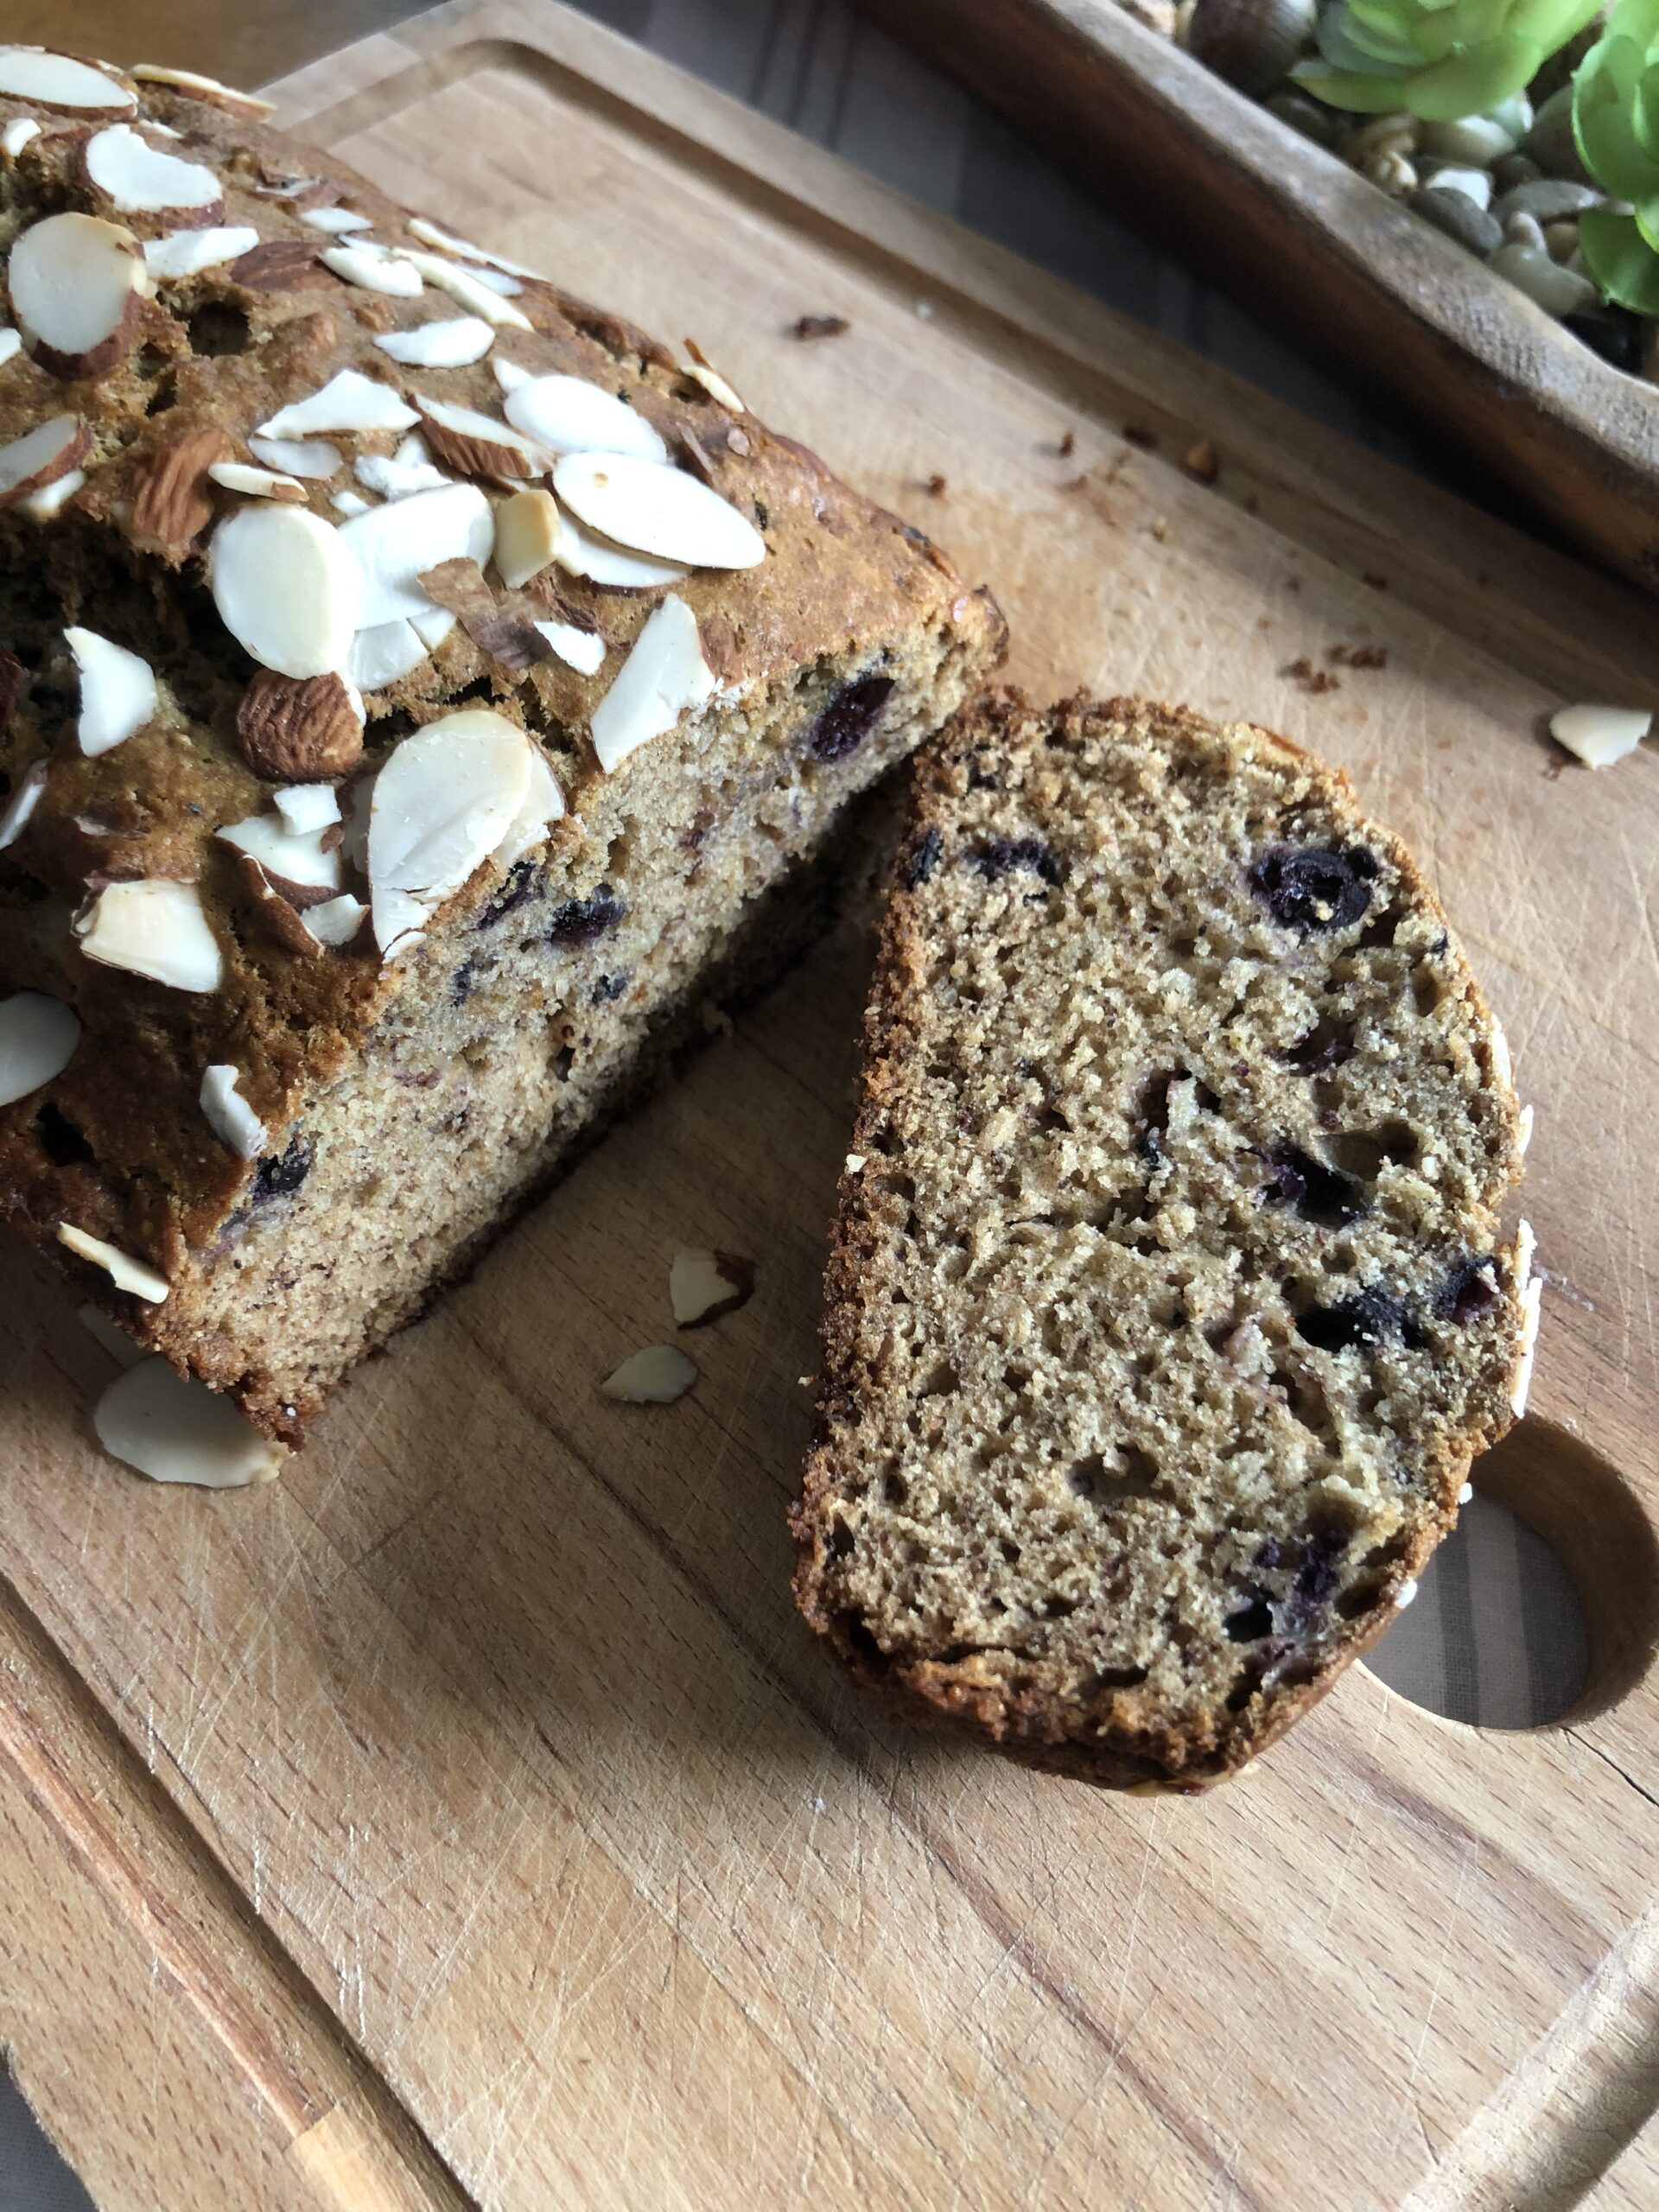 Recipes with Aronia Berries…try this one with Banana bread!